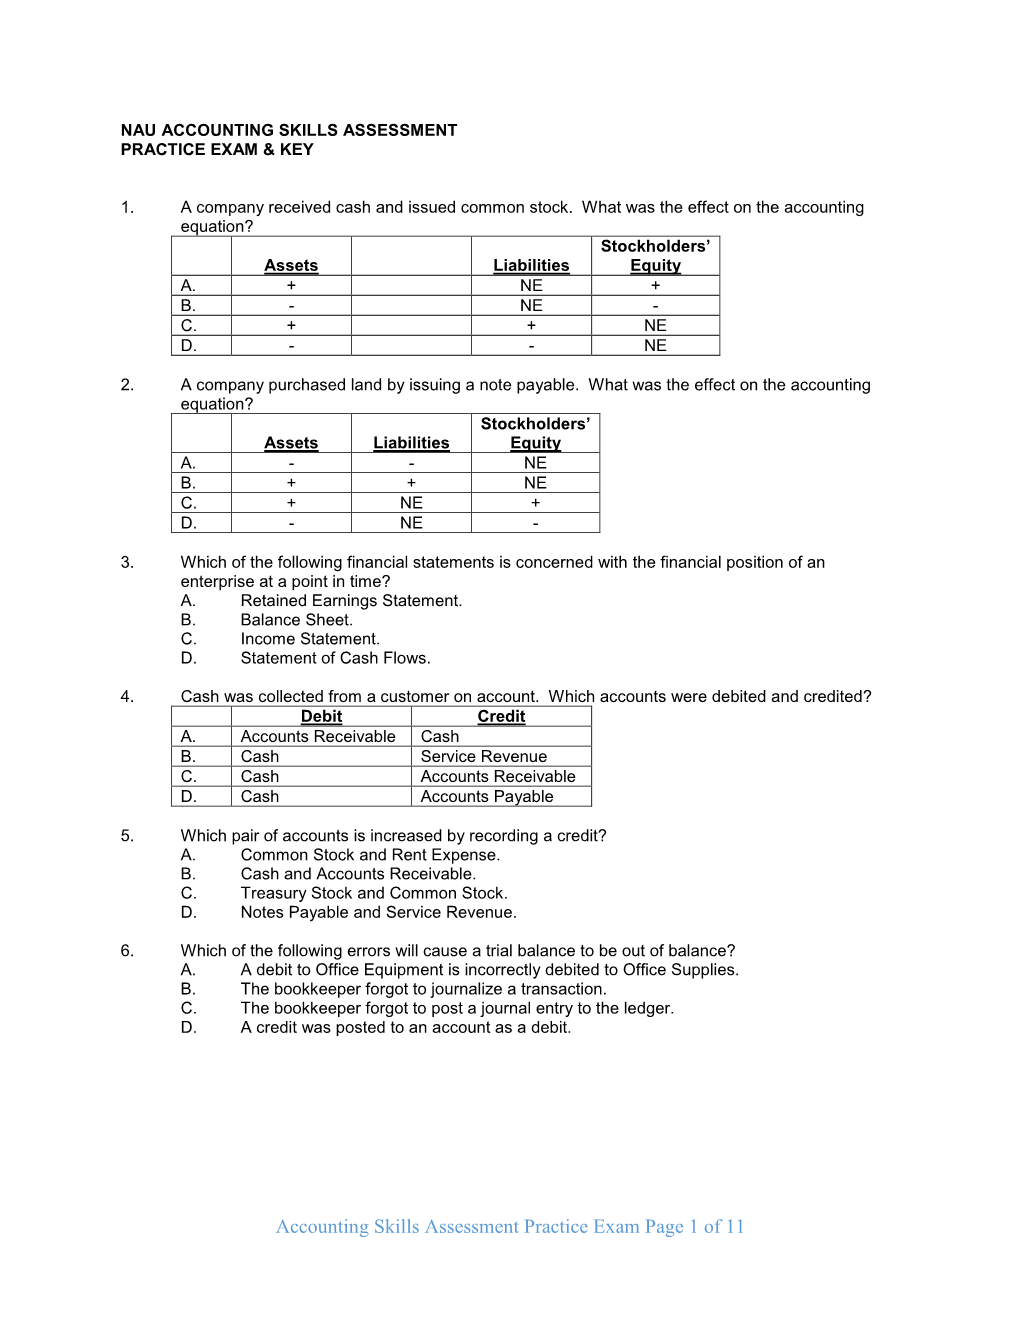 Accounting Skills Assessment Practice Exam Page 1 of 11